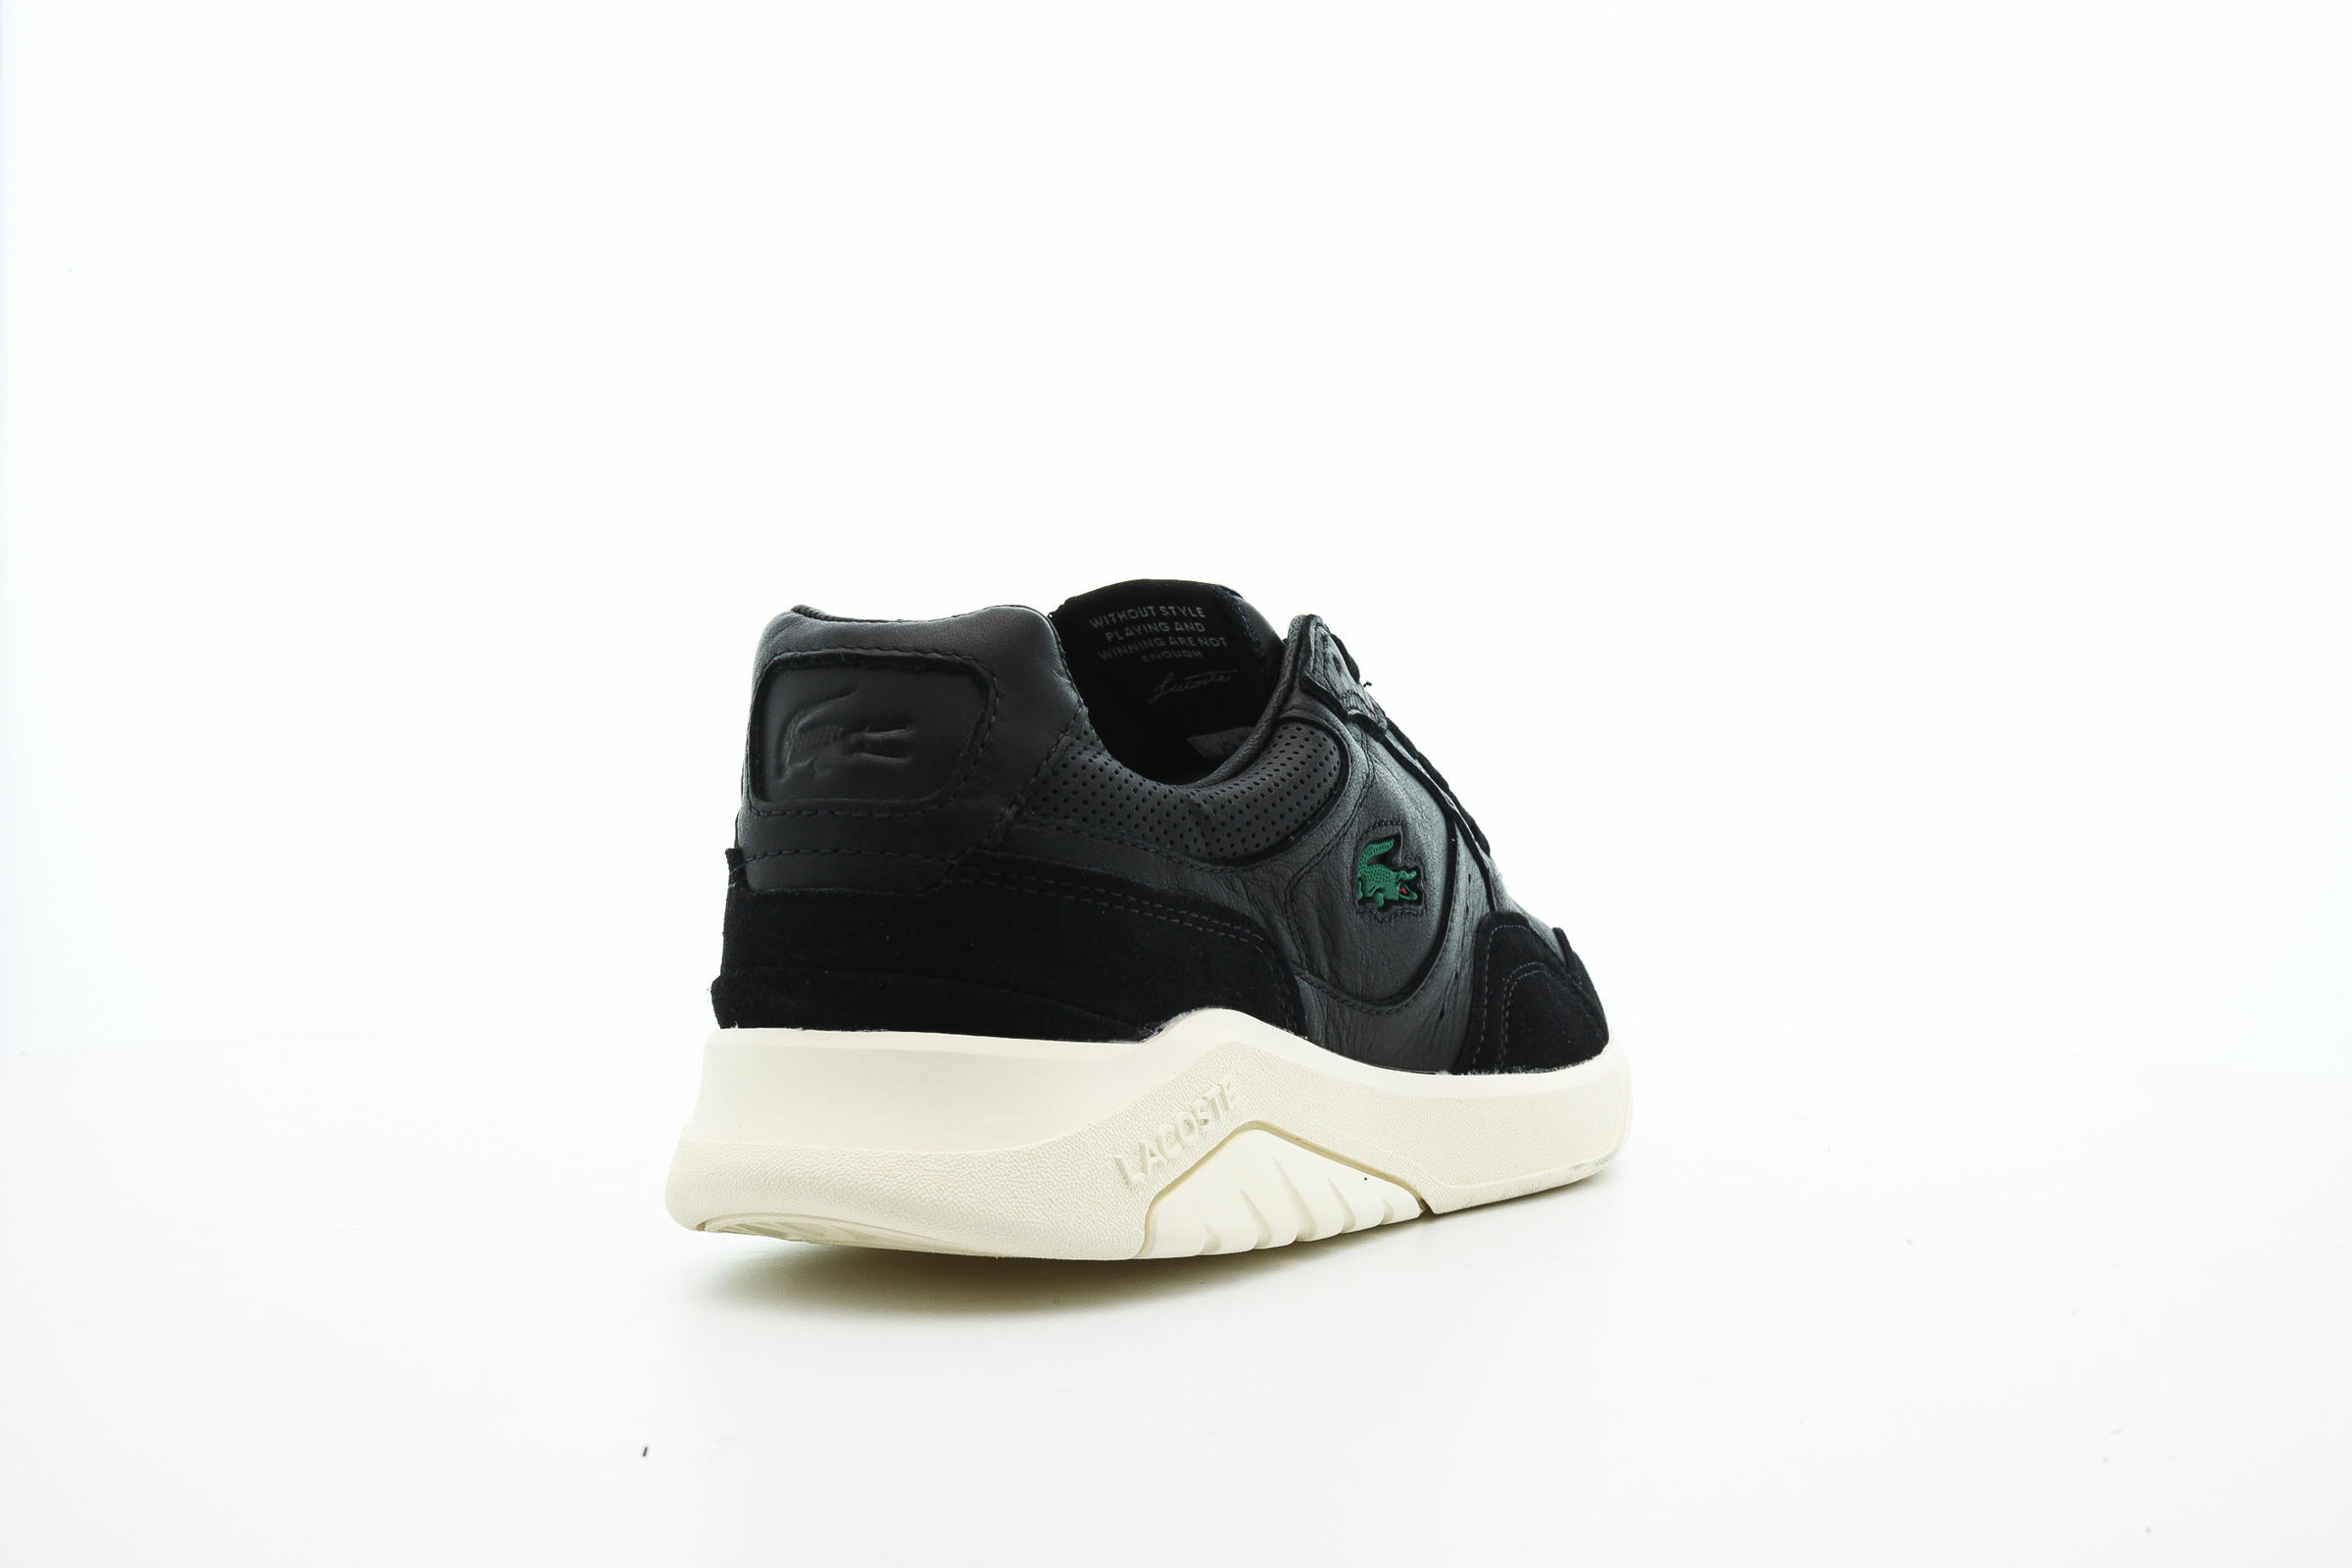 Lacoste GAME ADVANCE LUXE "BLACK"